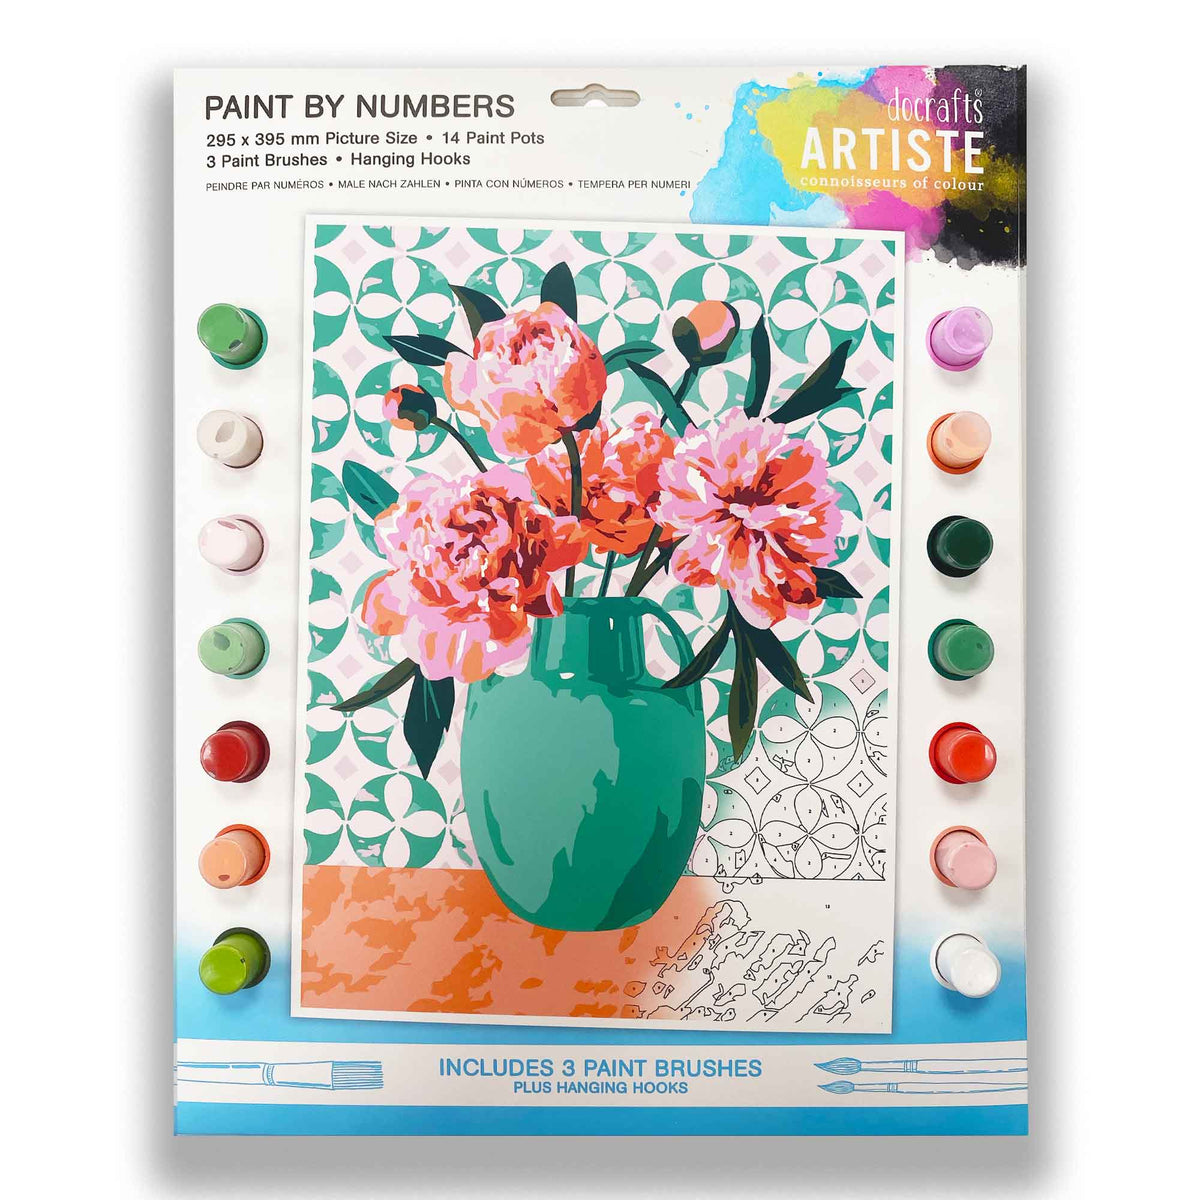 Docrafts Artiste Paint by Numbers (295 x 395mm) Beautiful Bouquet